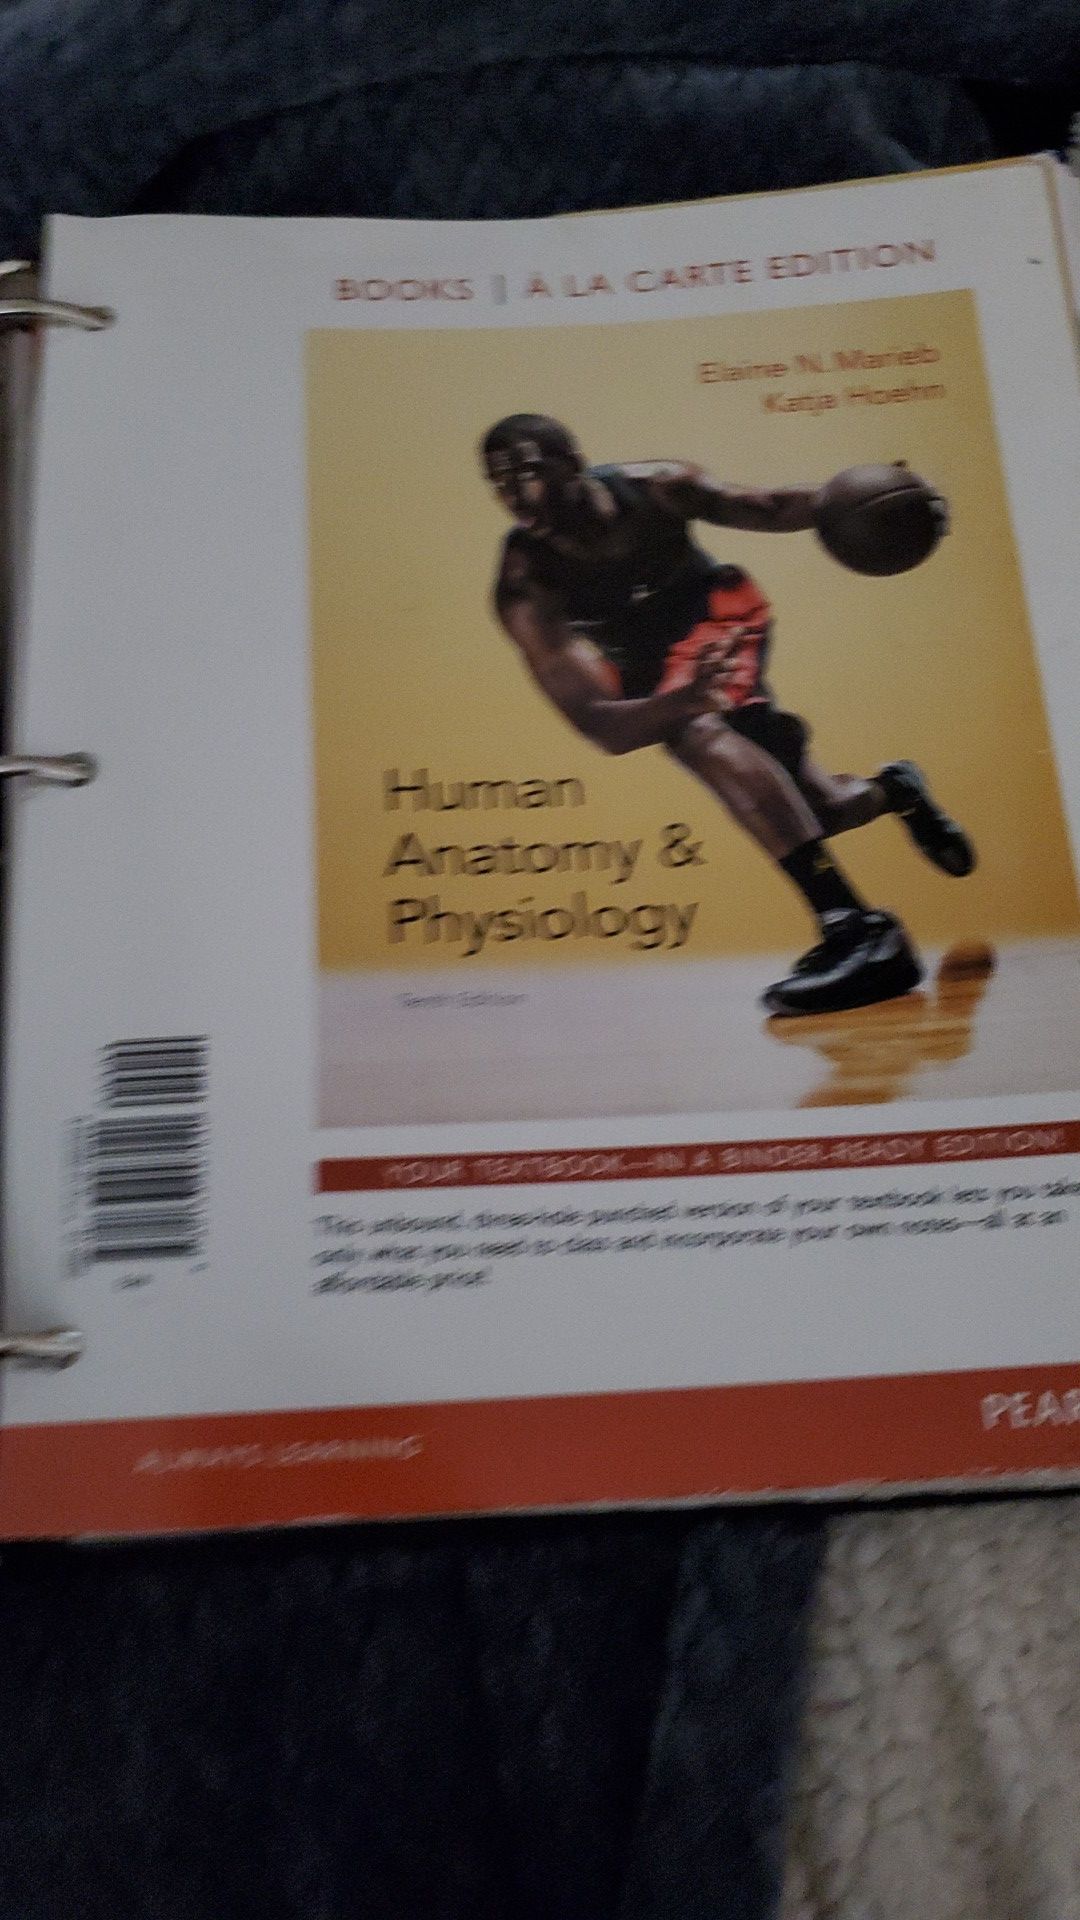 Anatomy and physiology book